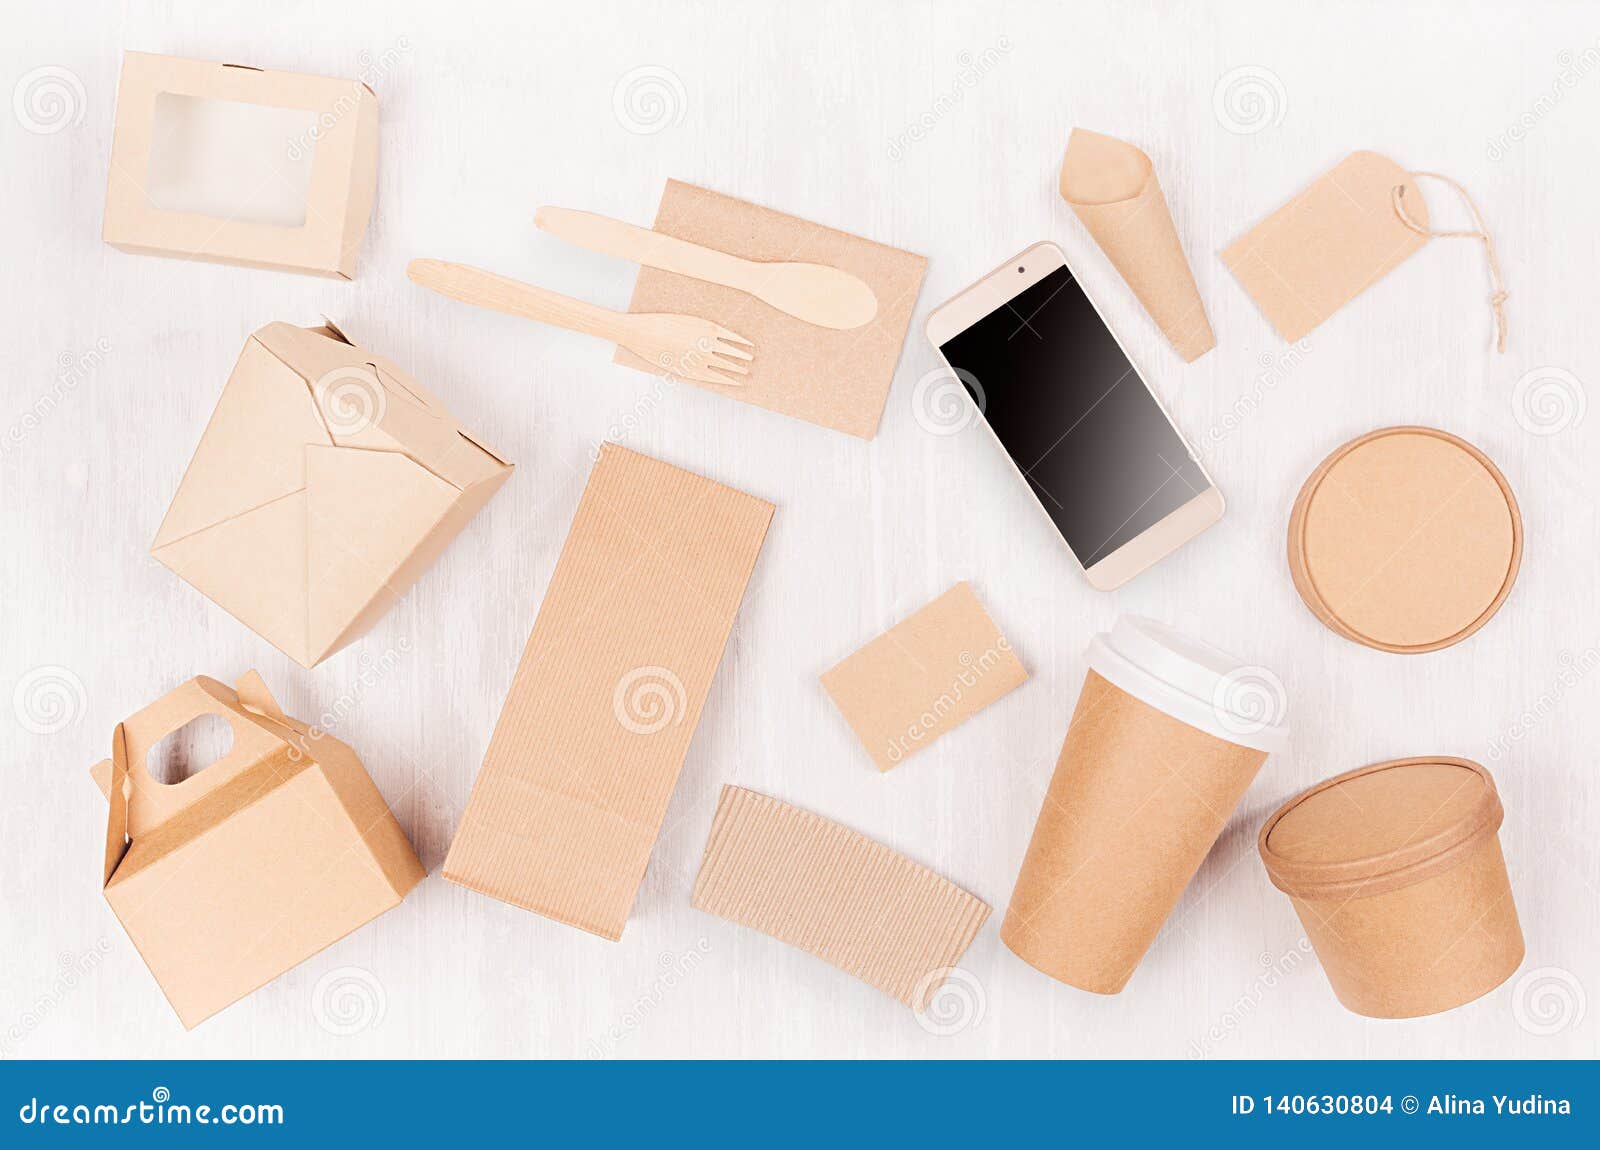 Download Mockup Food Takeaway Packaging For Cafe And Restaurant Pattern Of Phone Cardboard Box For Coffee Burger Noodles Sushi Stock Photo Image Of Card Packaging 140630804